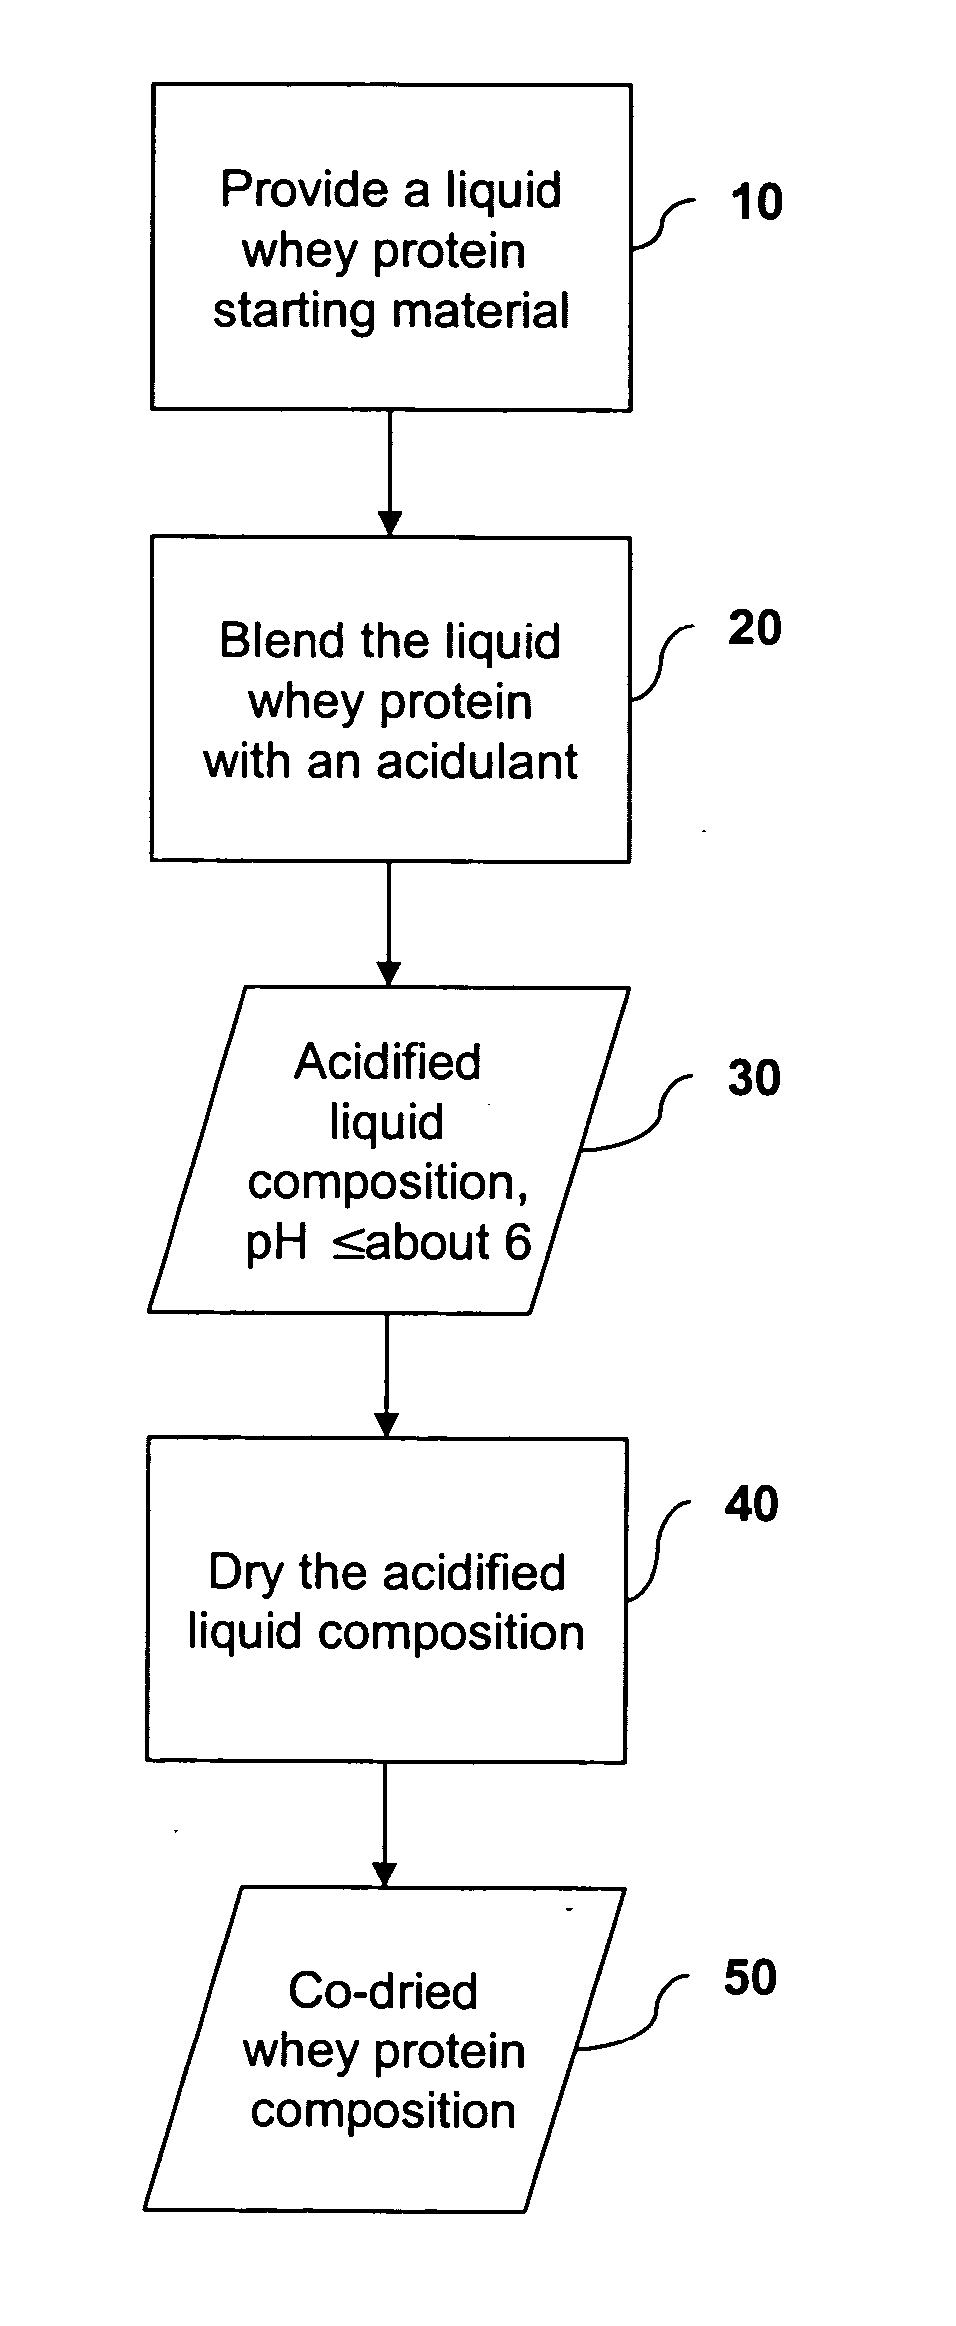 Acidified whey protein compositions and methods for making them